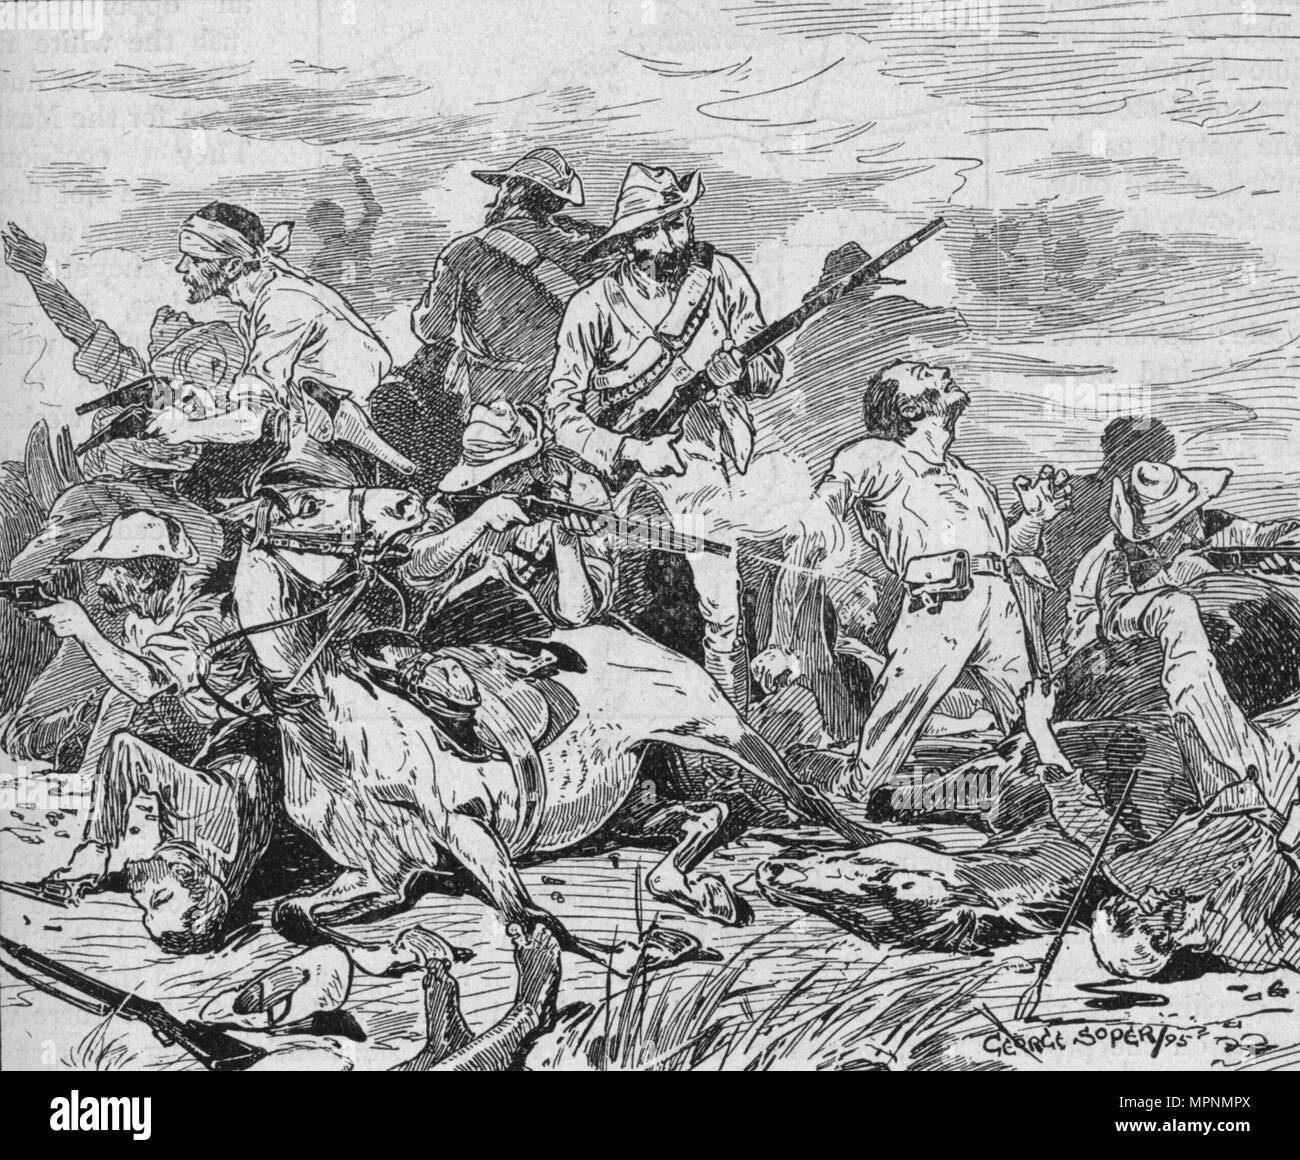 They Fought on Grimly, 1895, (1902). Artist: George Soper. Stock Photo